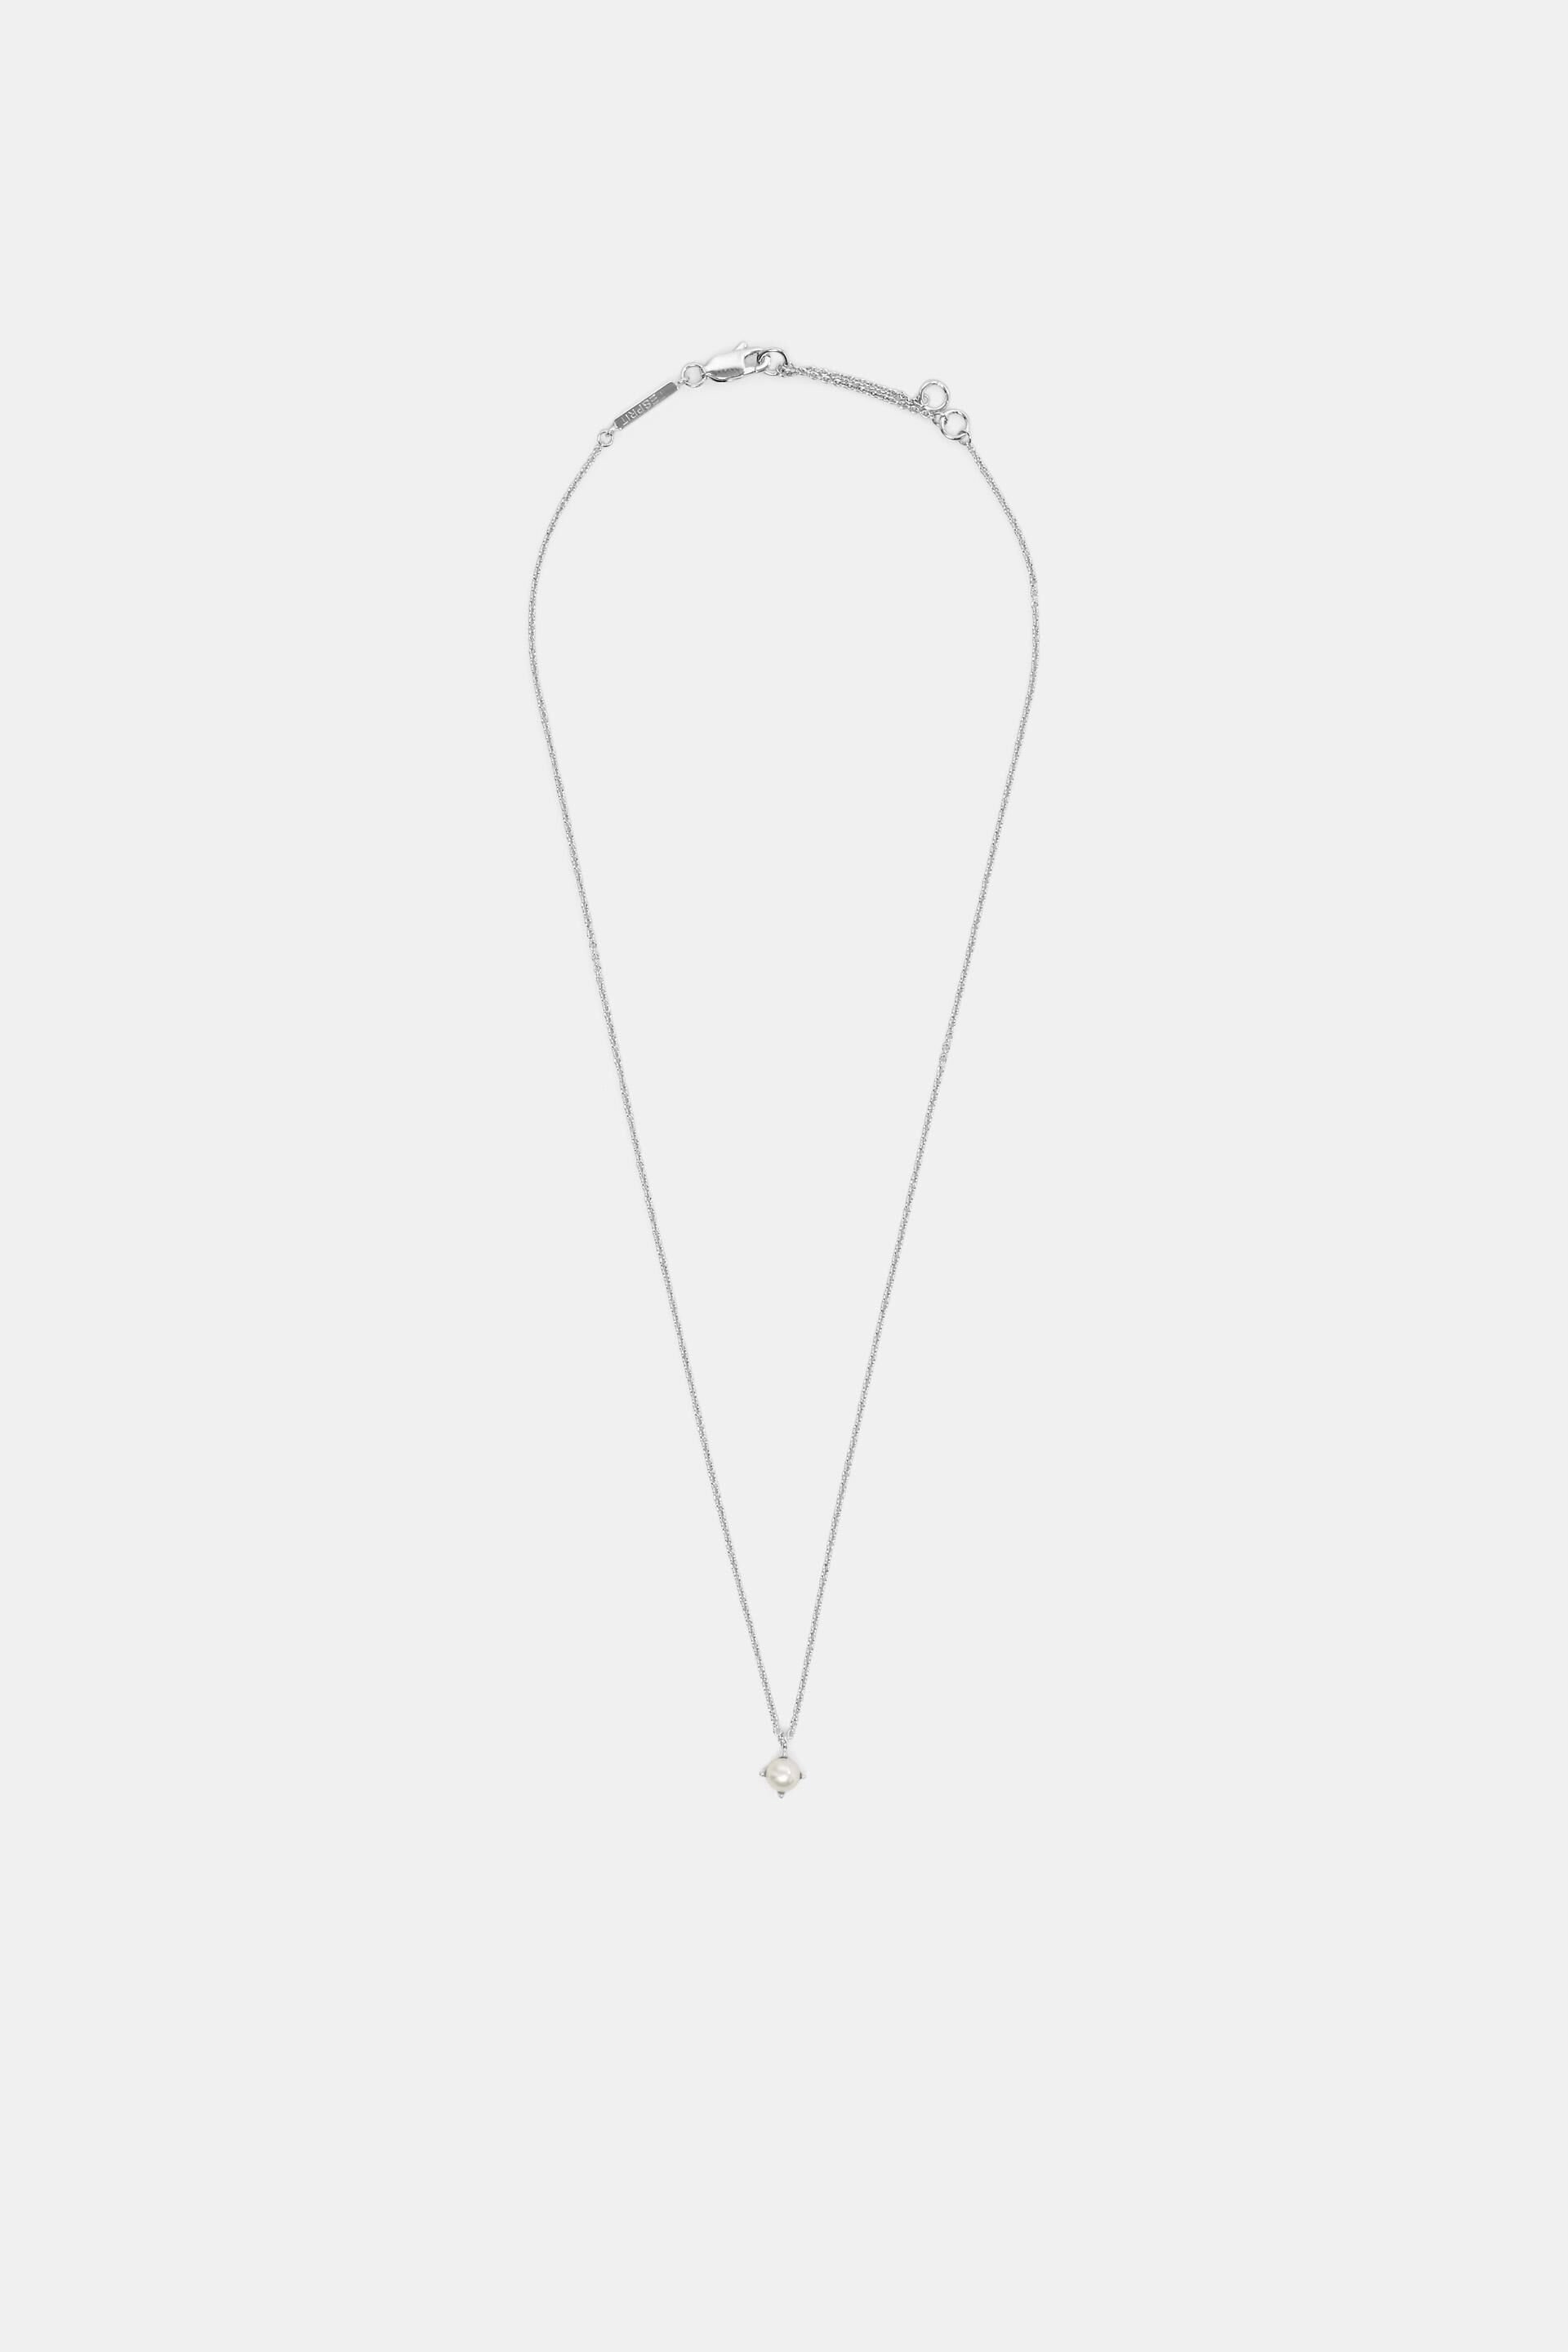 Esprit Online Store Dainty Sterling Silver Pendant Necklace